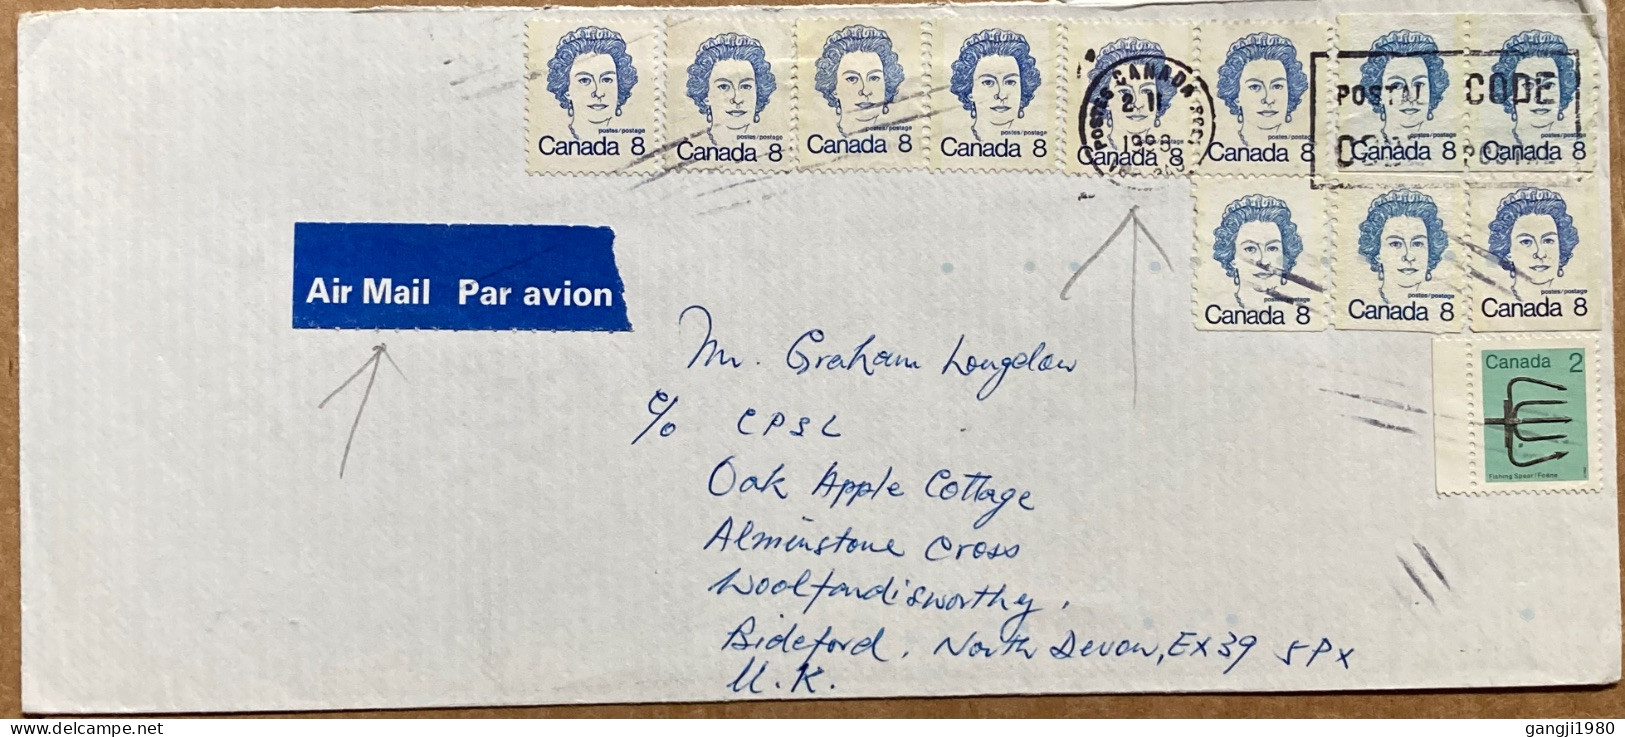 CANADA 1988, COVER USED TO ENGLAND, MULTI 12 STAMP, QUEEN & FISHING SPEAR, POST CODE, MACHINE SLOGAN CANCEL. - Covers & Documents